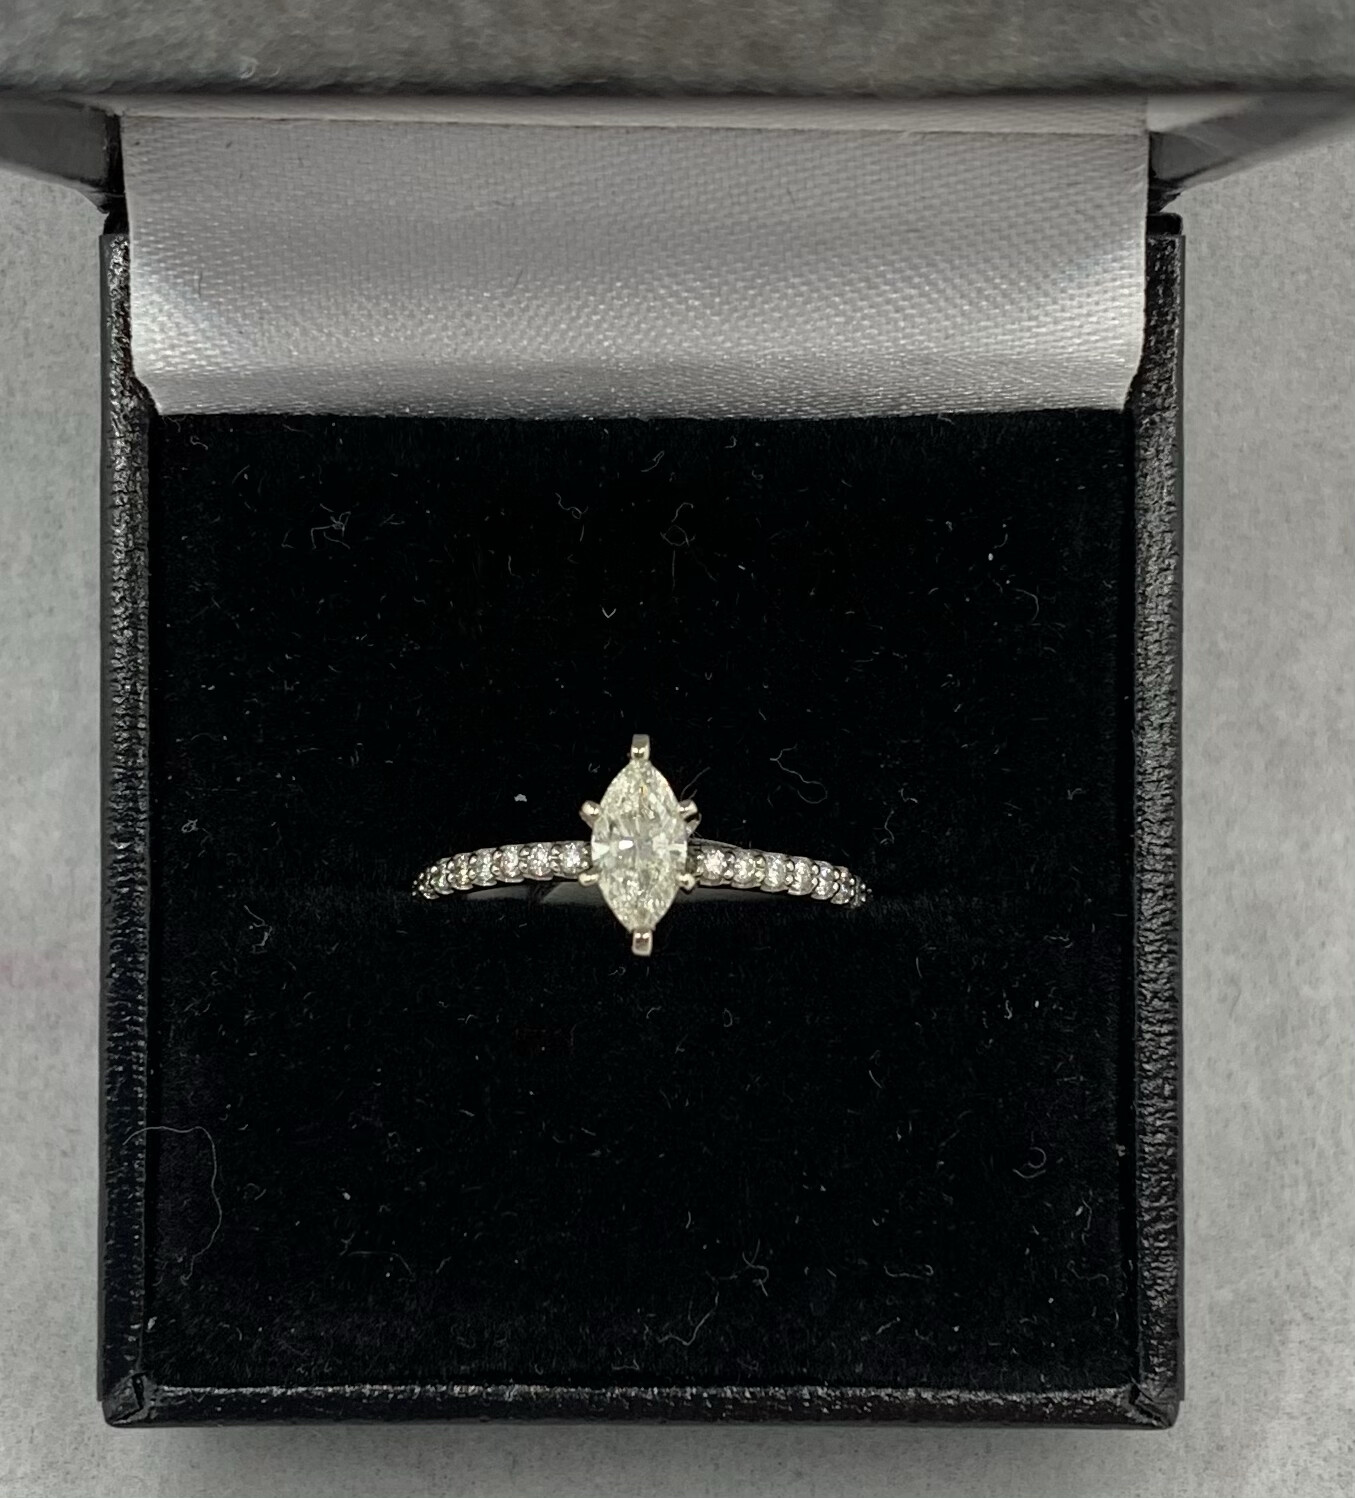 Diamond Engagement Ring Marquise Cut Center with Diamond Accents 64 Pts Total Weight 14 Kt. White Gold Setting